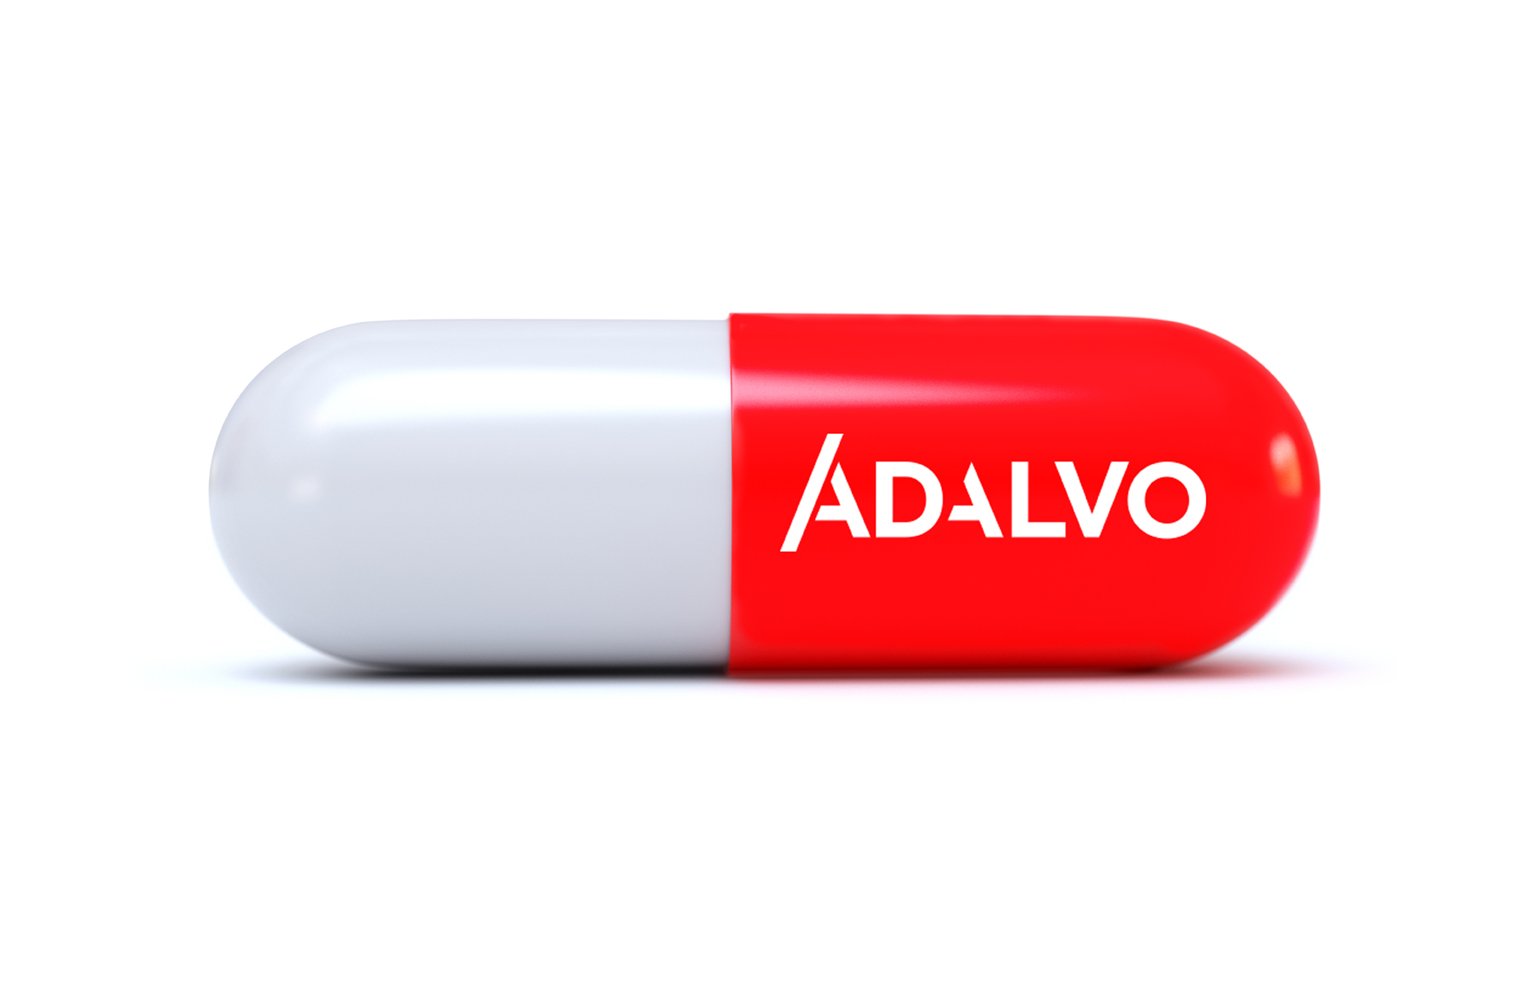 Adalvo announces second wave DCP approvals for Desmopressin